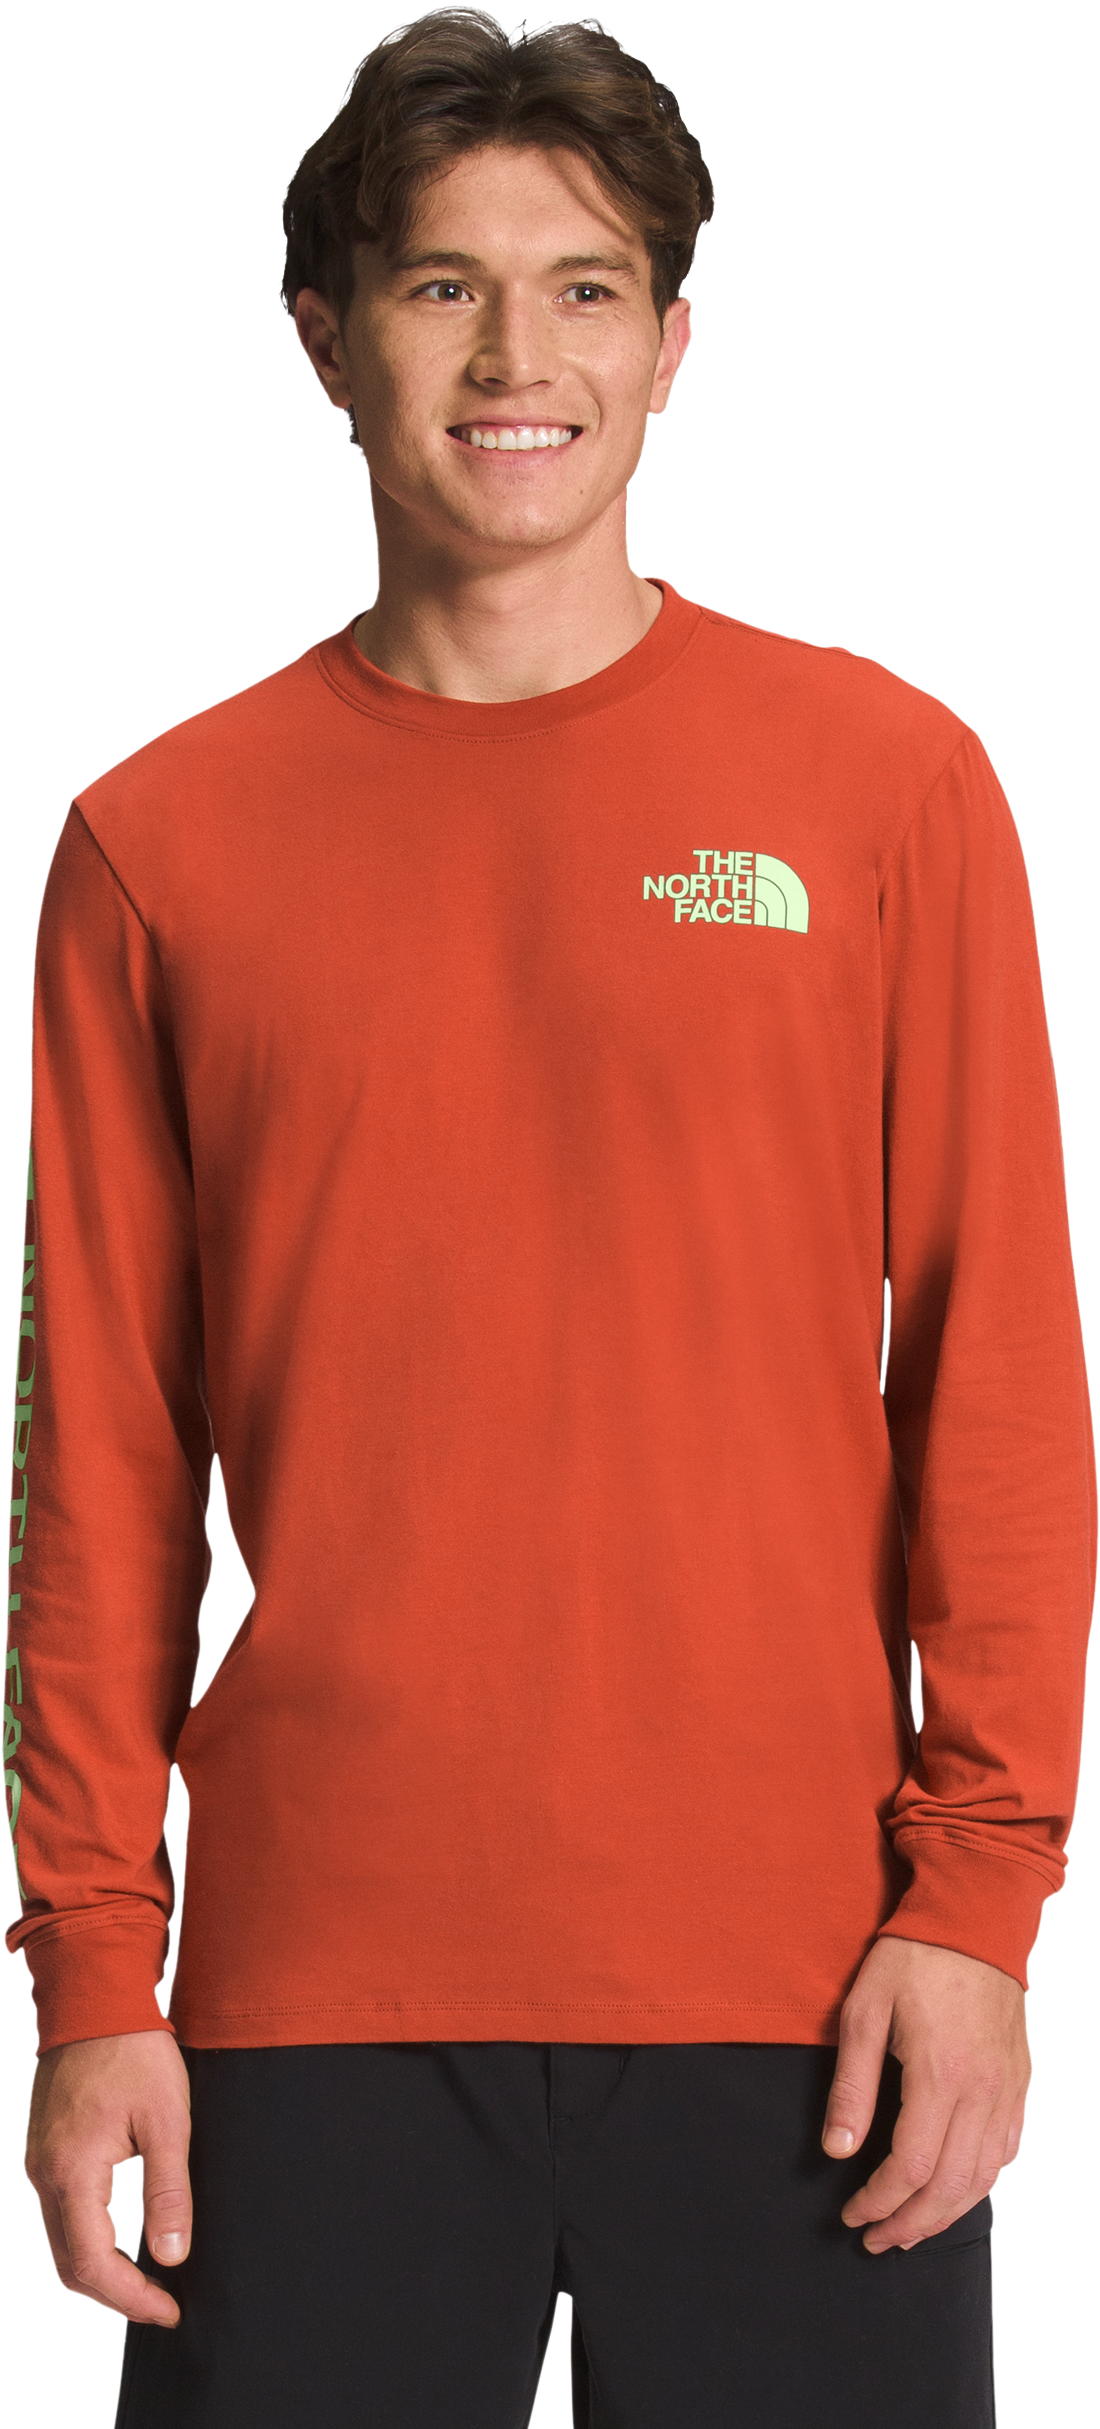 The North Face Hit Graphic Long-Sleeve T-Shirt for Men - Rust Bronze/Lime Cream - S